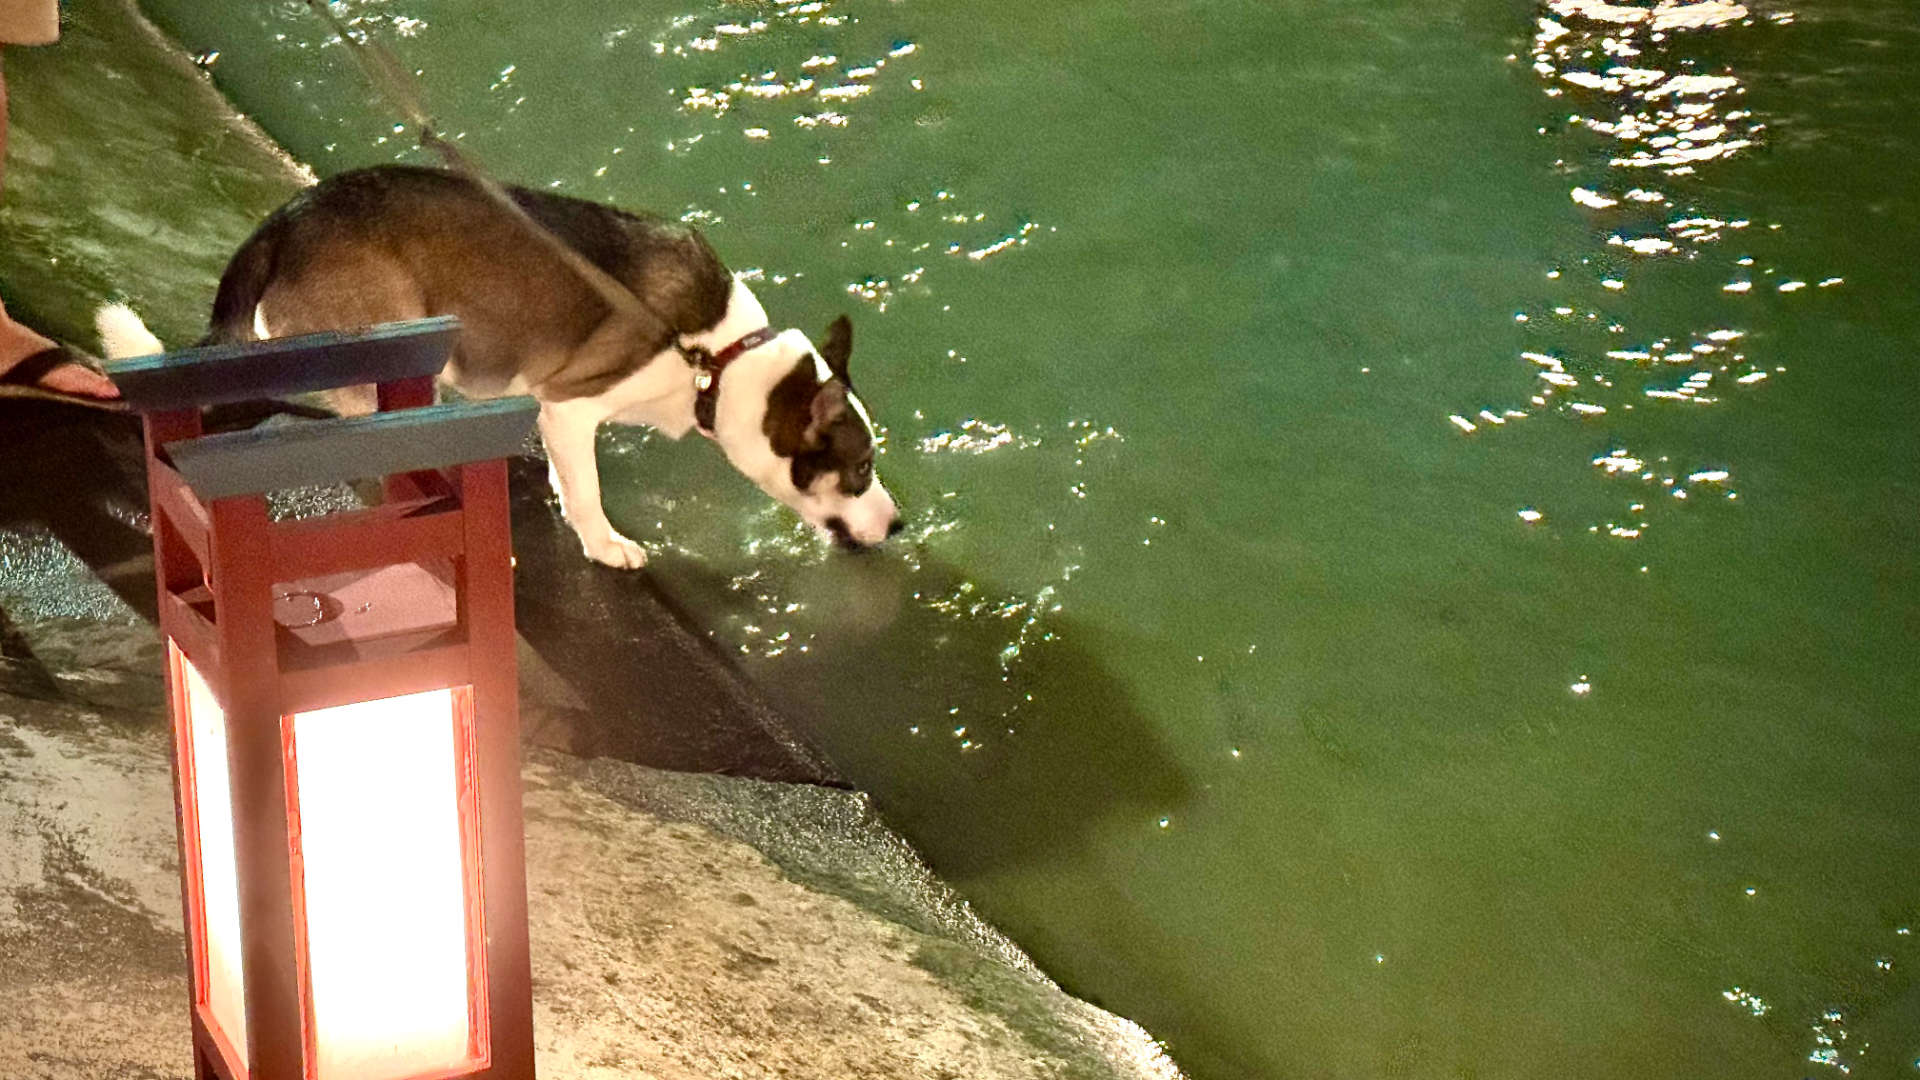 A dog on a leash, drinking from the canal next to a lantern.